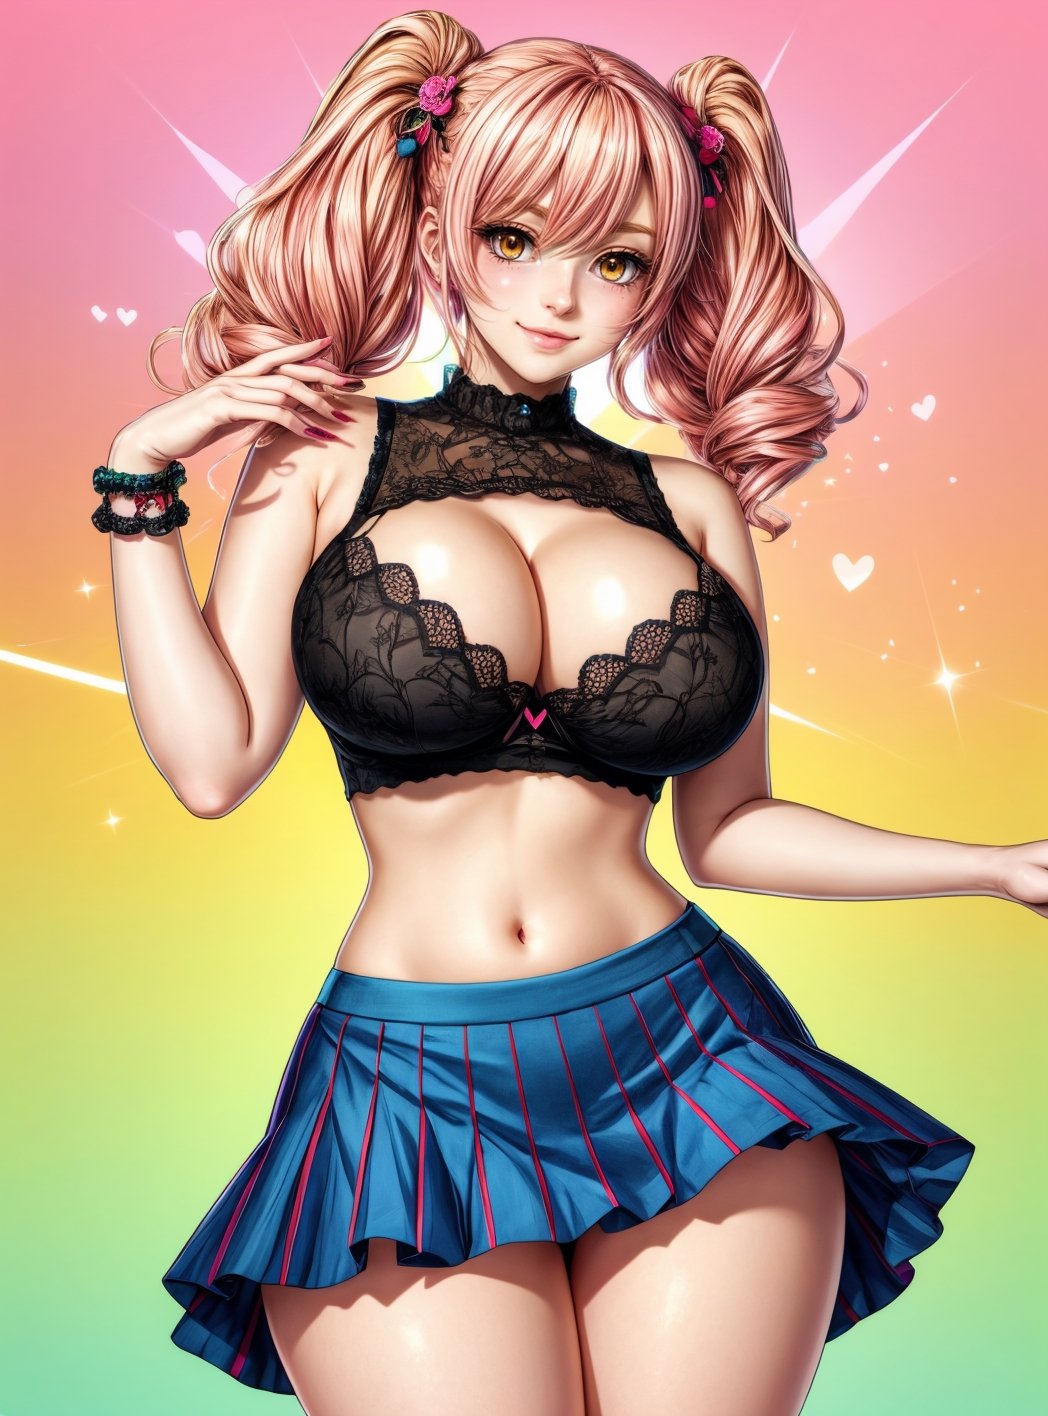 masterpiece, highly detailed skin, hdr, 8k, intricate details, (image of woman:1.2), skirt, tanktop, huge breasts, wide hips, beautiful face, long legs, femme fatale, kawaii style undefined, cute, adorable, brightly colored, cheerful, anime influence, highly detailed, manga style undefined, vibrant, high-energy, detailed, iconic, Japanese comic style